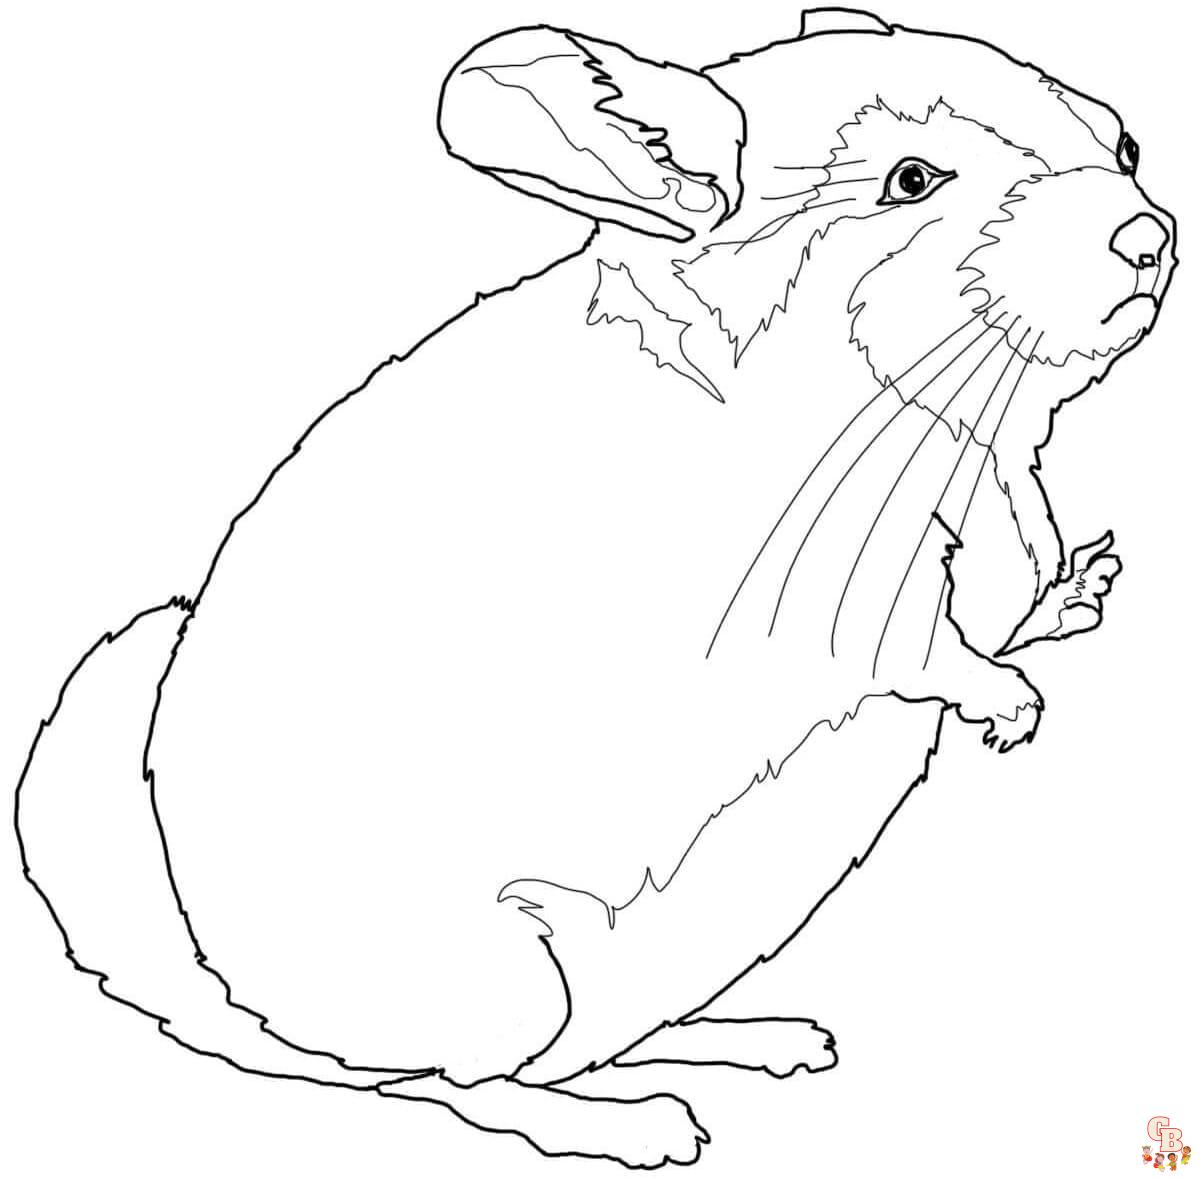 Chinchilla coloring pages printable free